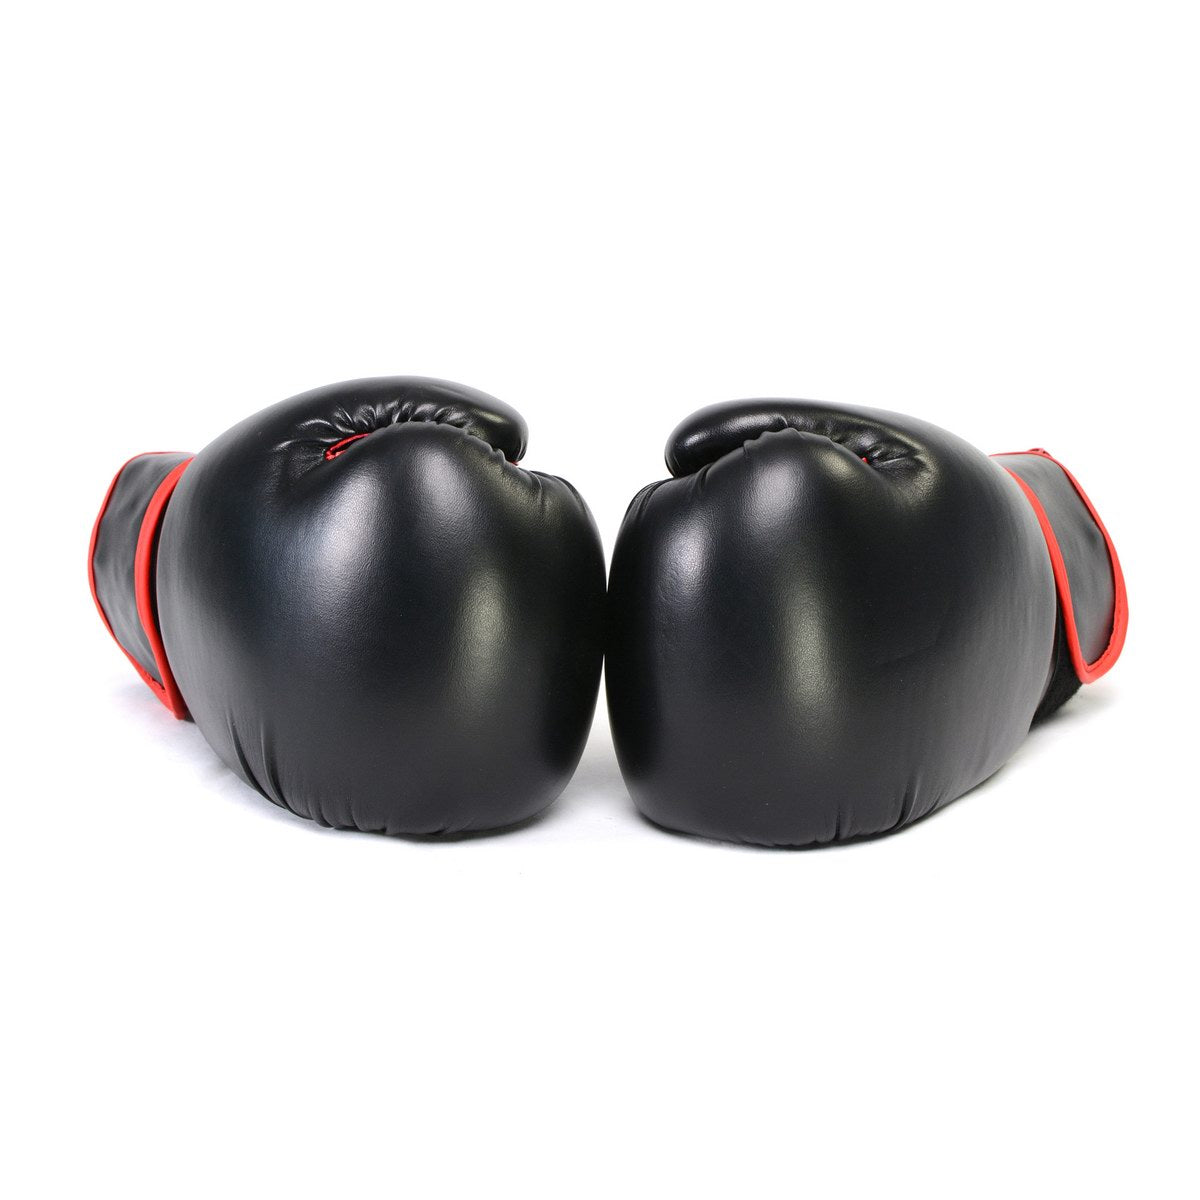 X-Fitness XF2000 Gel Boxing Kickboxing Punching Bag Gloves-BLK/RED